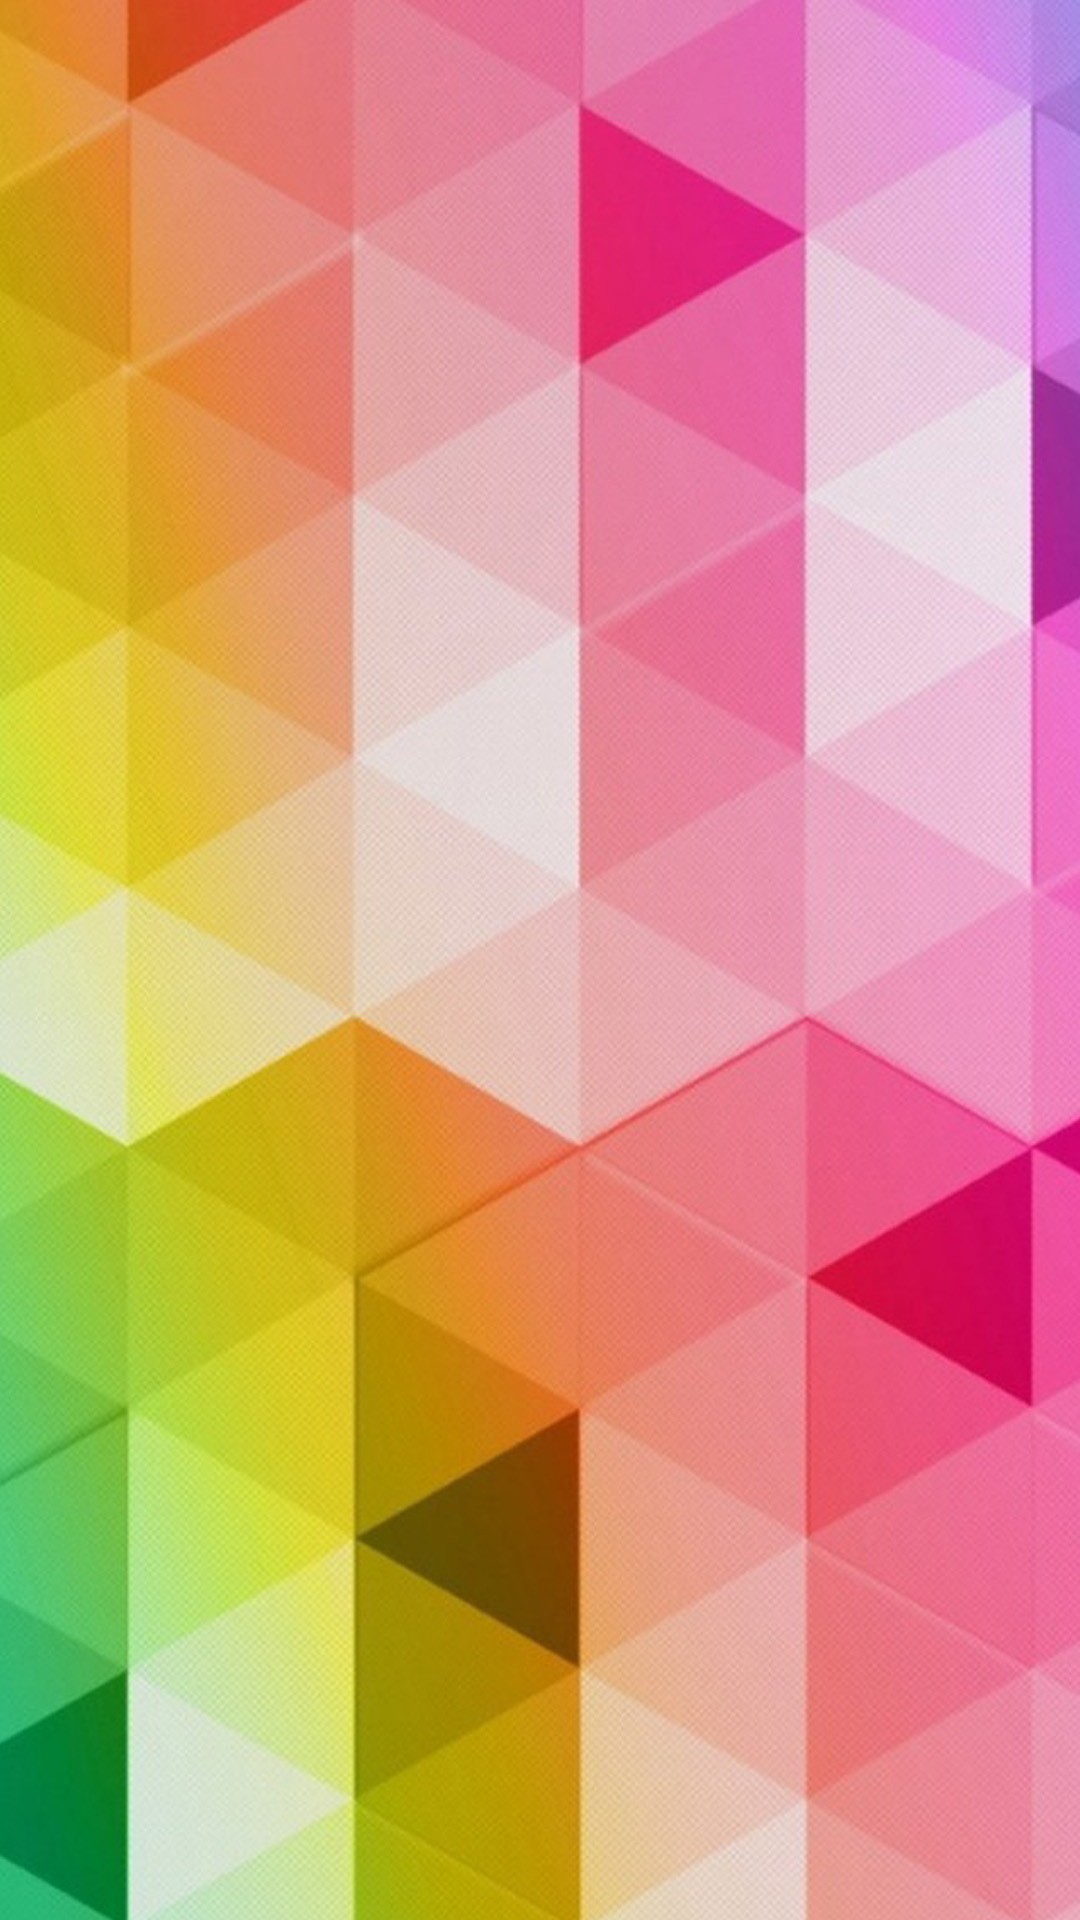 Design 01 Android wallpaper